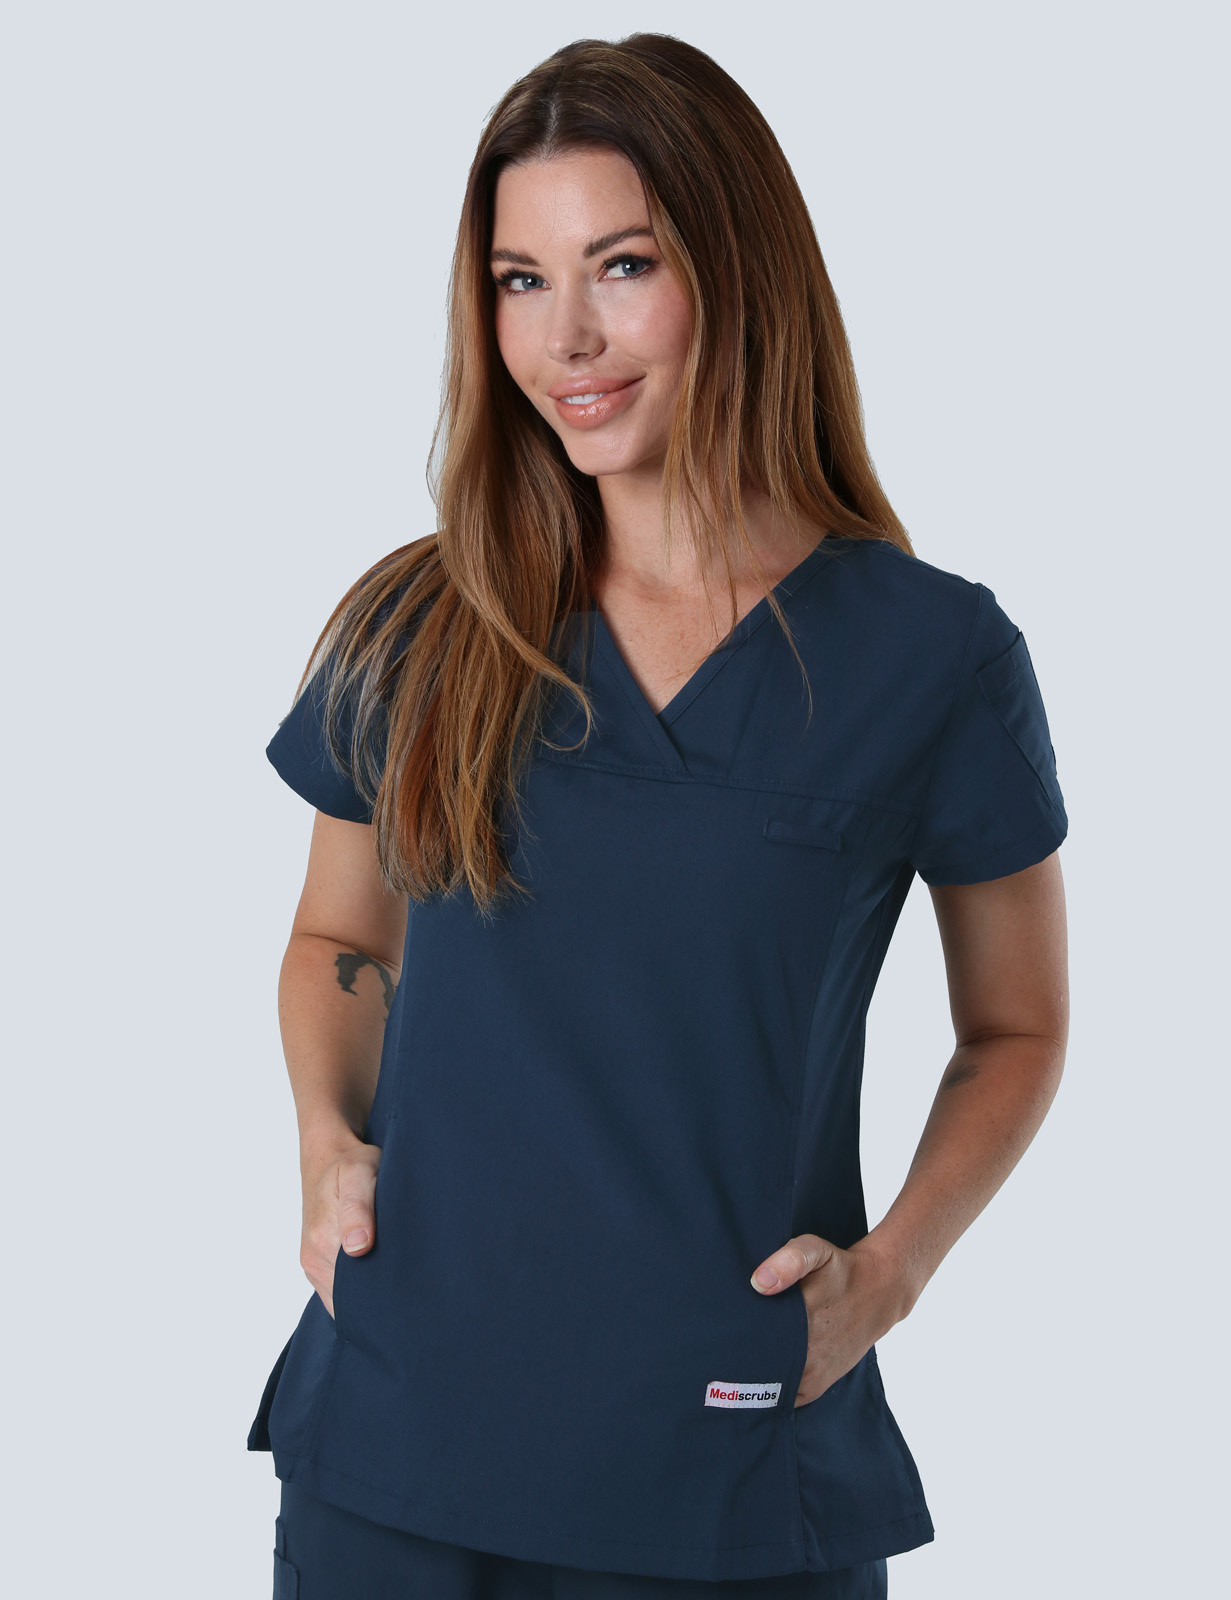 Peninsula Health Frankston - 4GN Nurse (Women's Fit Solid Scrub Top and Cargo Pants in Navy incl Logos)